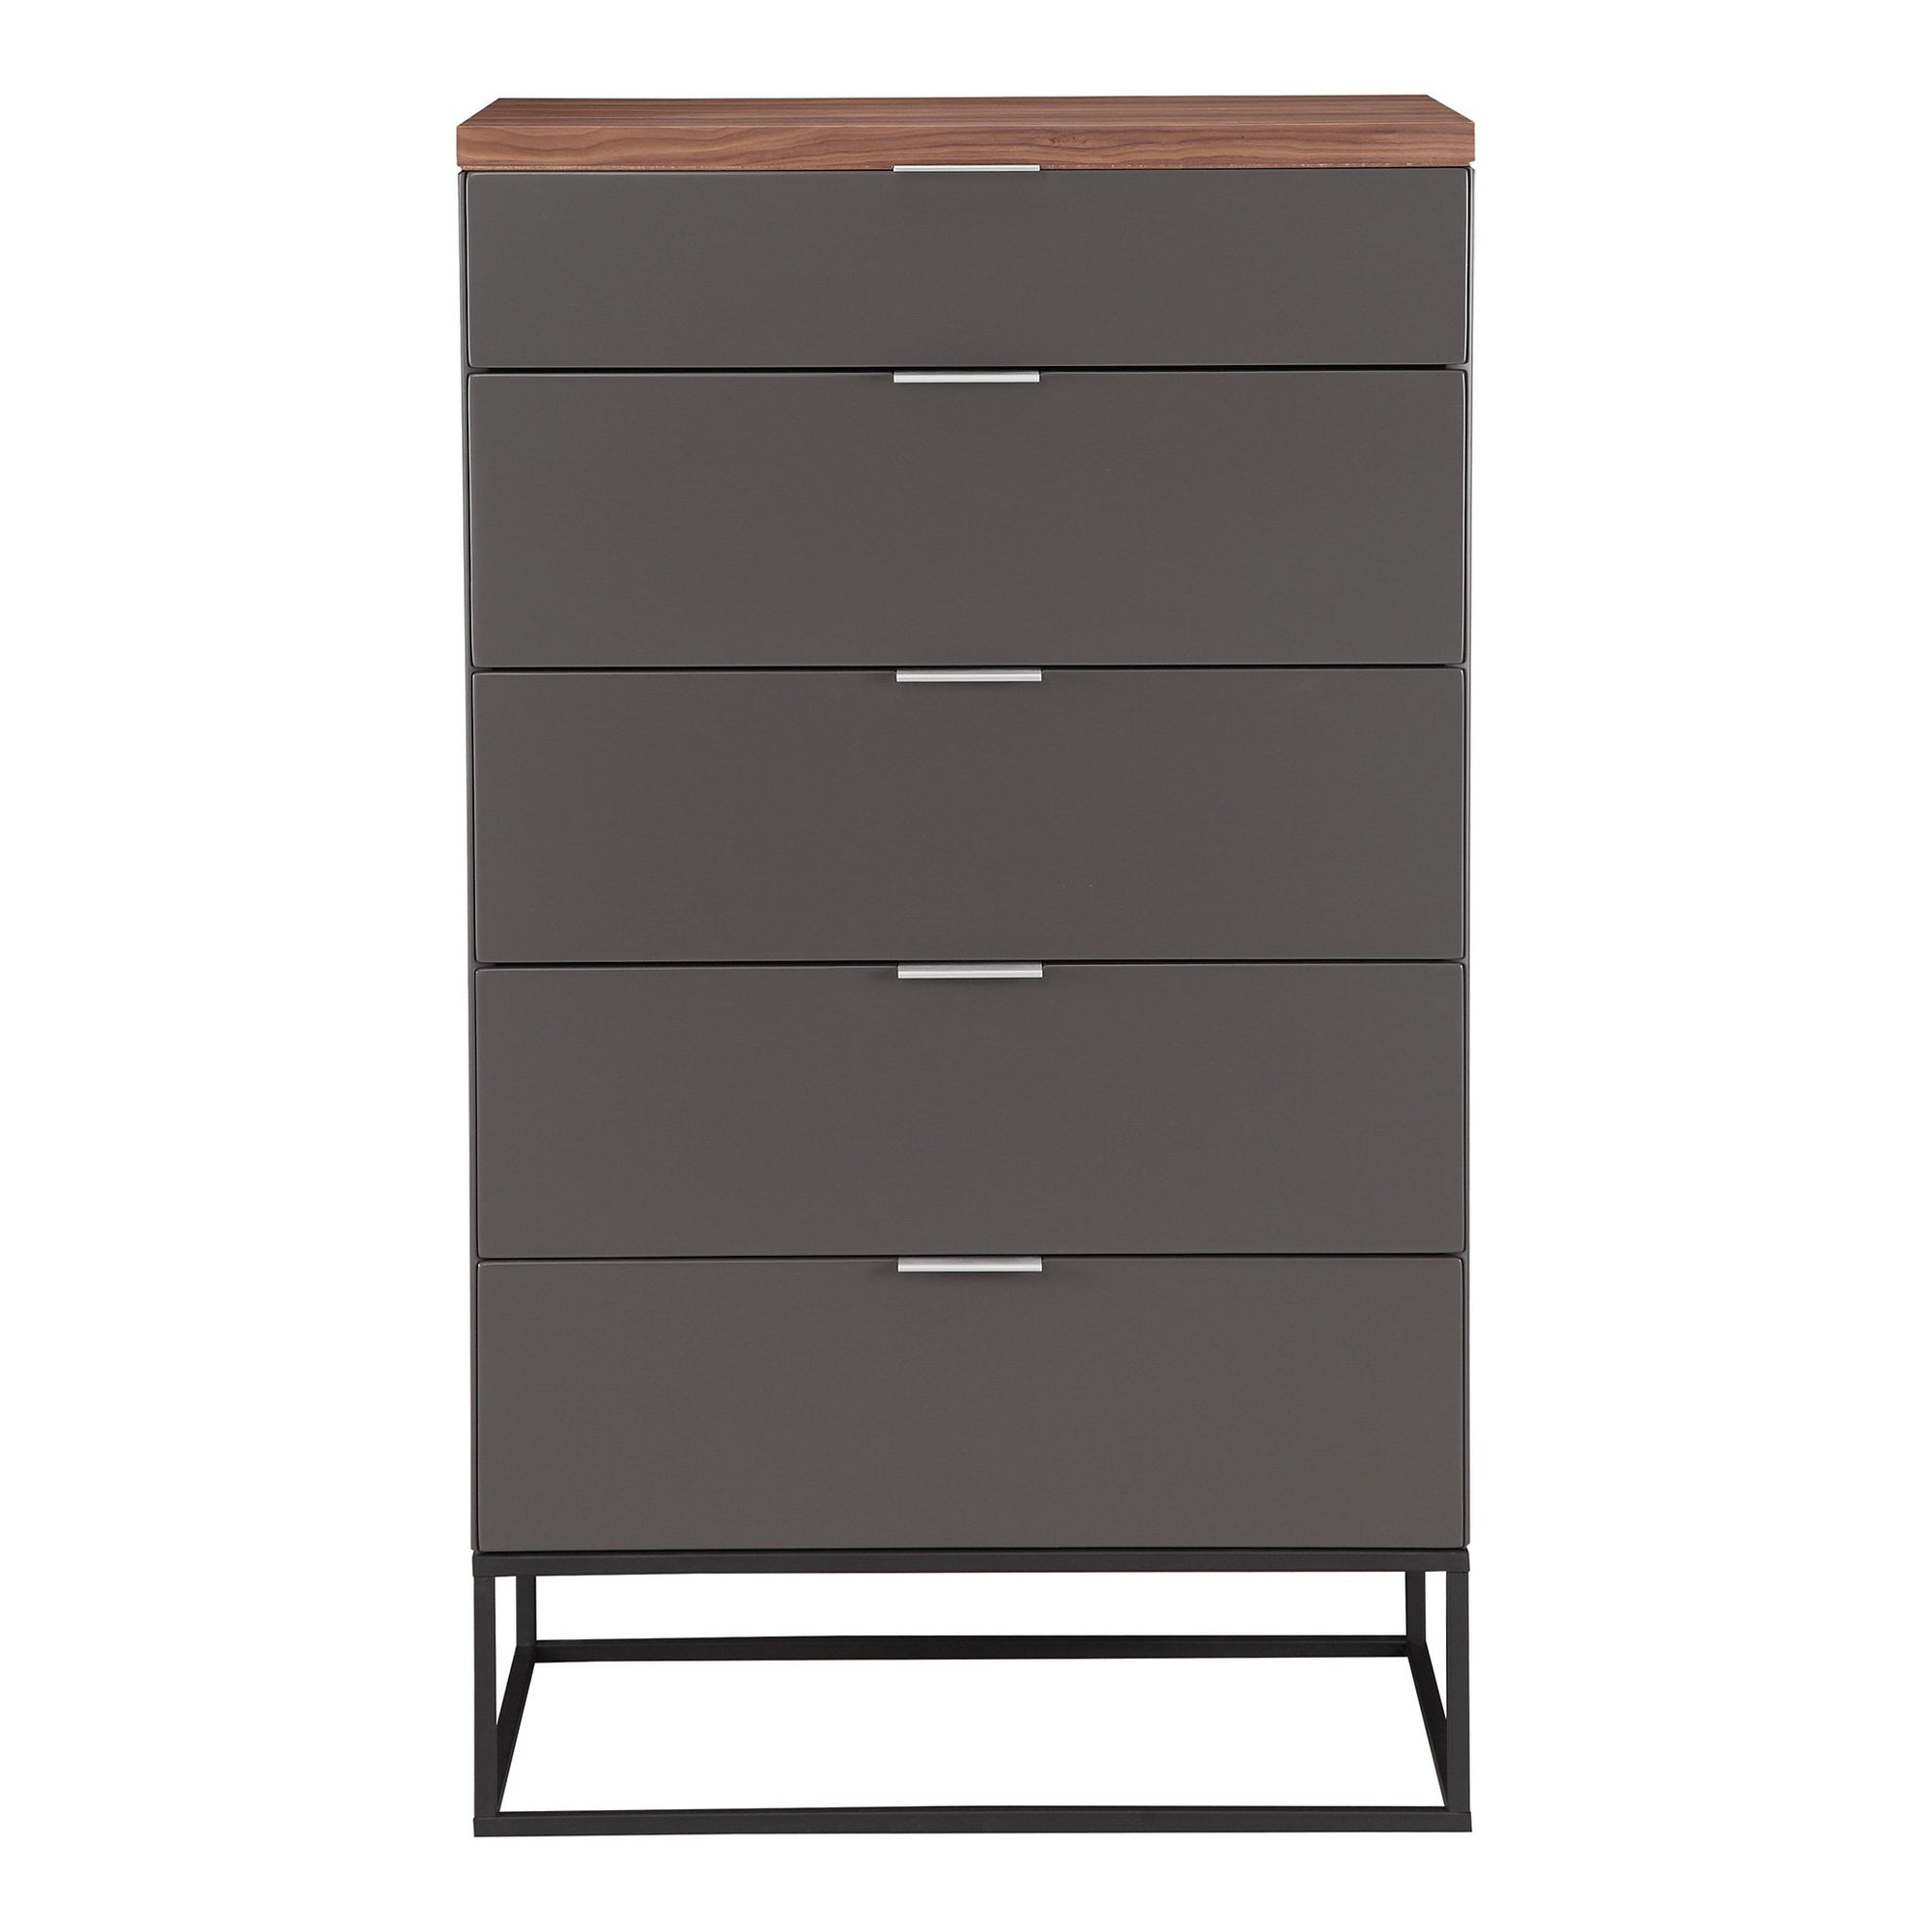 MOES-LEROY TALL CABINET-Dressers-MODTEMPO